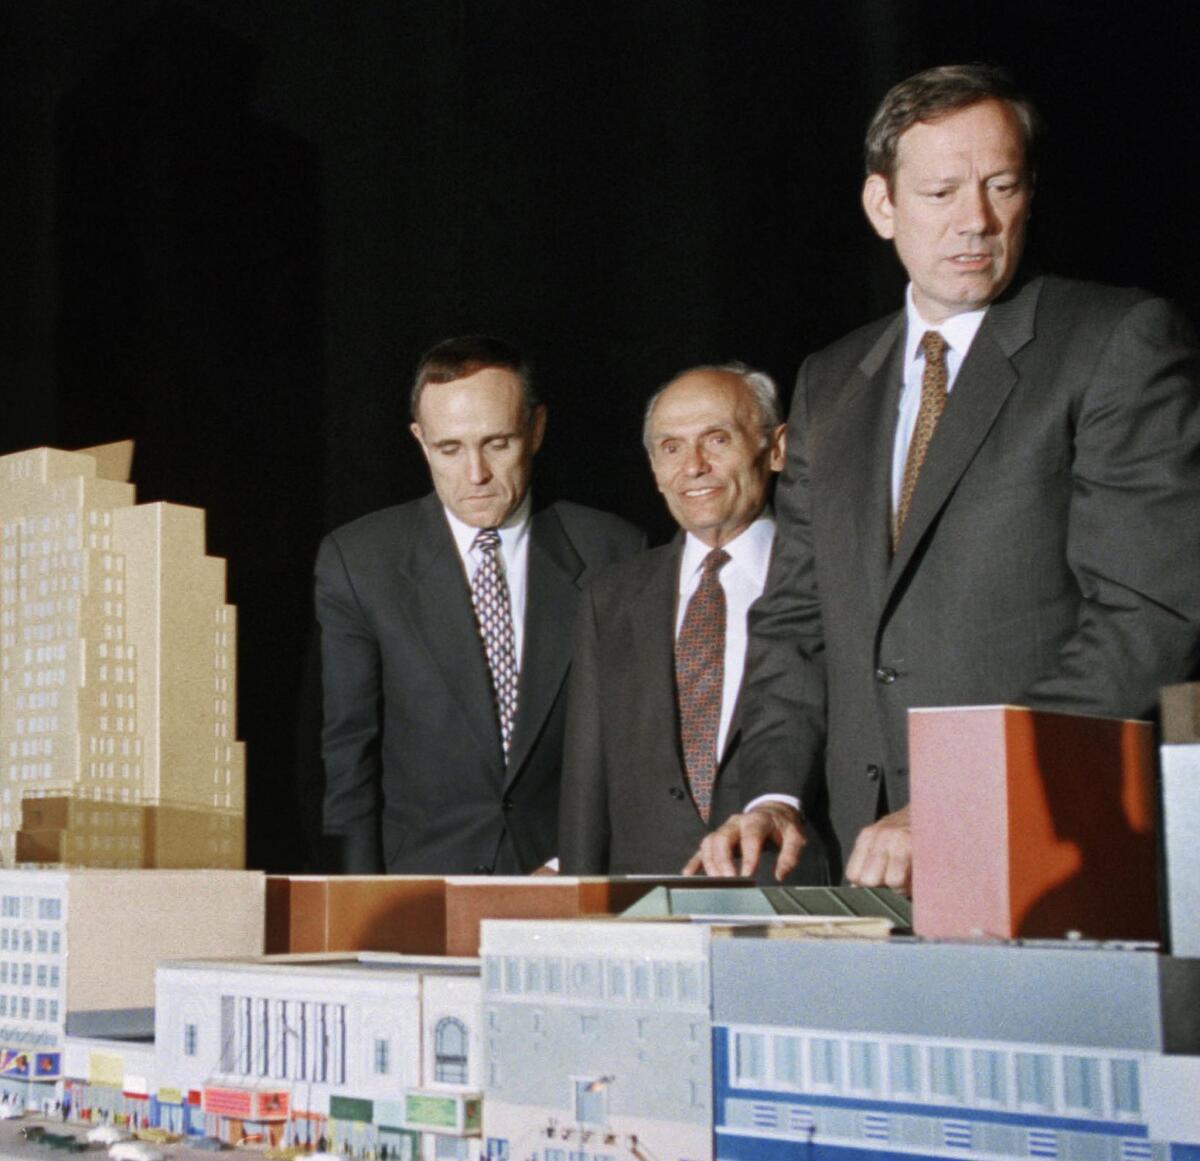 New York City Mayor Rudolph Giuliani, left, developer John Tishman, center, and New York Gov. George Pataki with a scale model of the 42nd Street development project in New York. Tishman's firm worked on some of the nation's largest development projects, including Disney's EPCOT Center and the World Trade Center in New York.